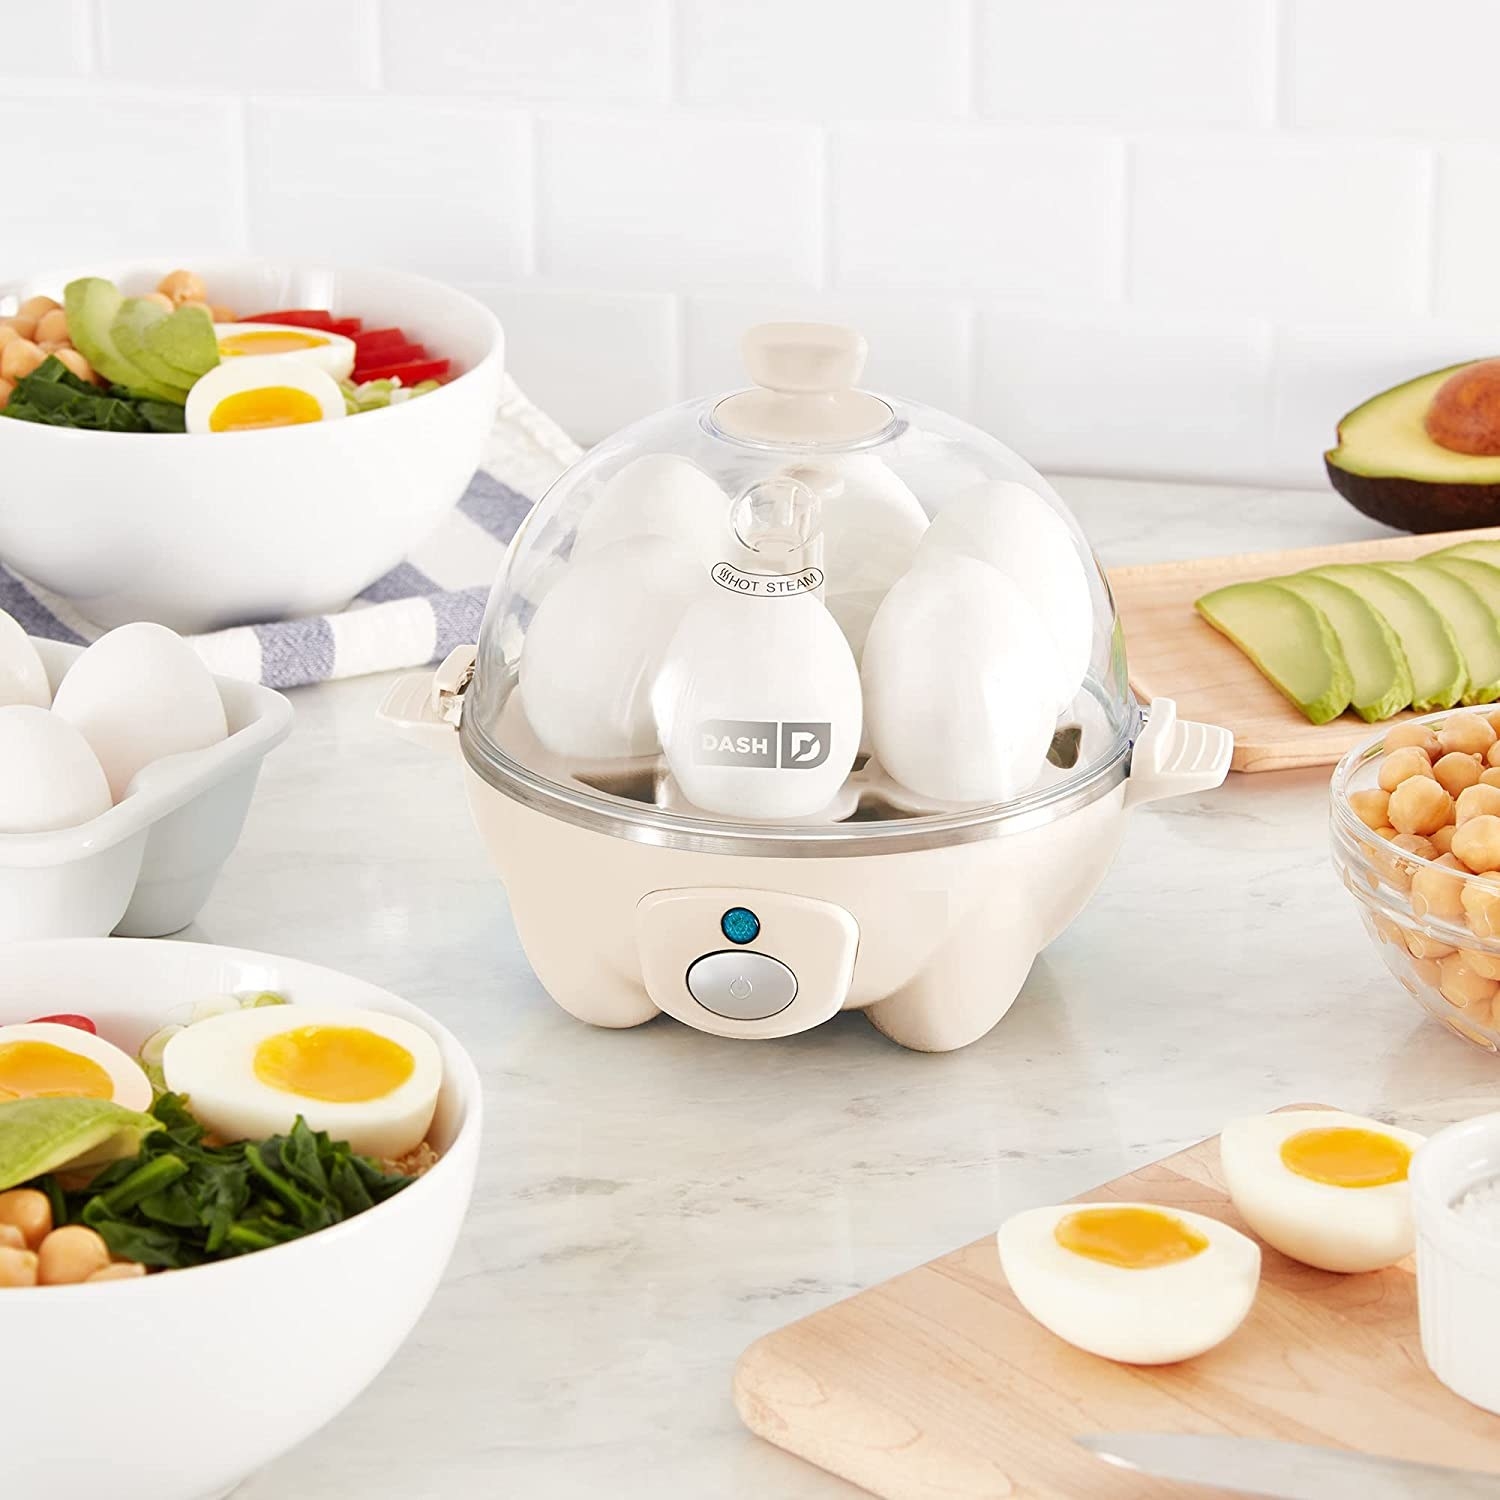 The rapid egg cooker in the color Cream